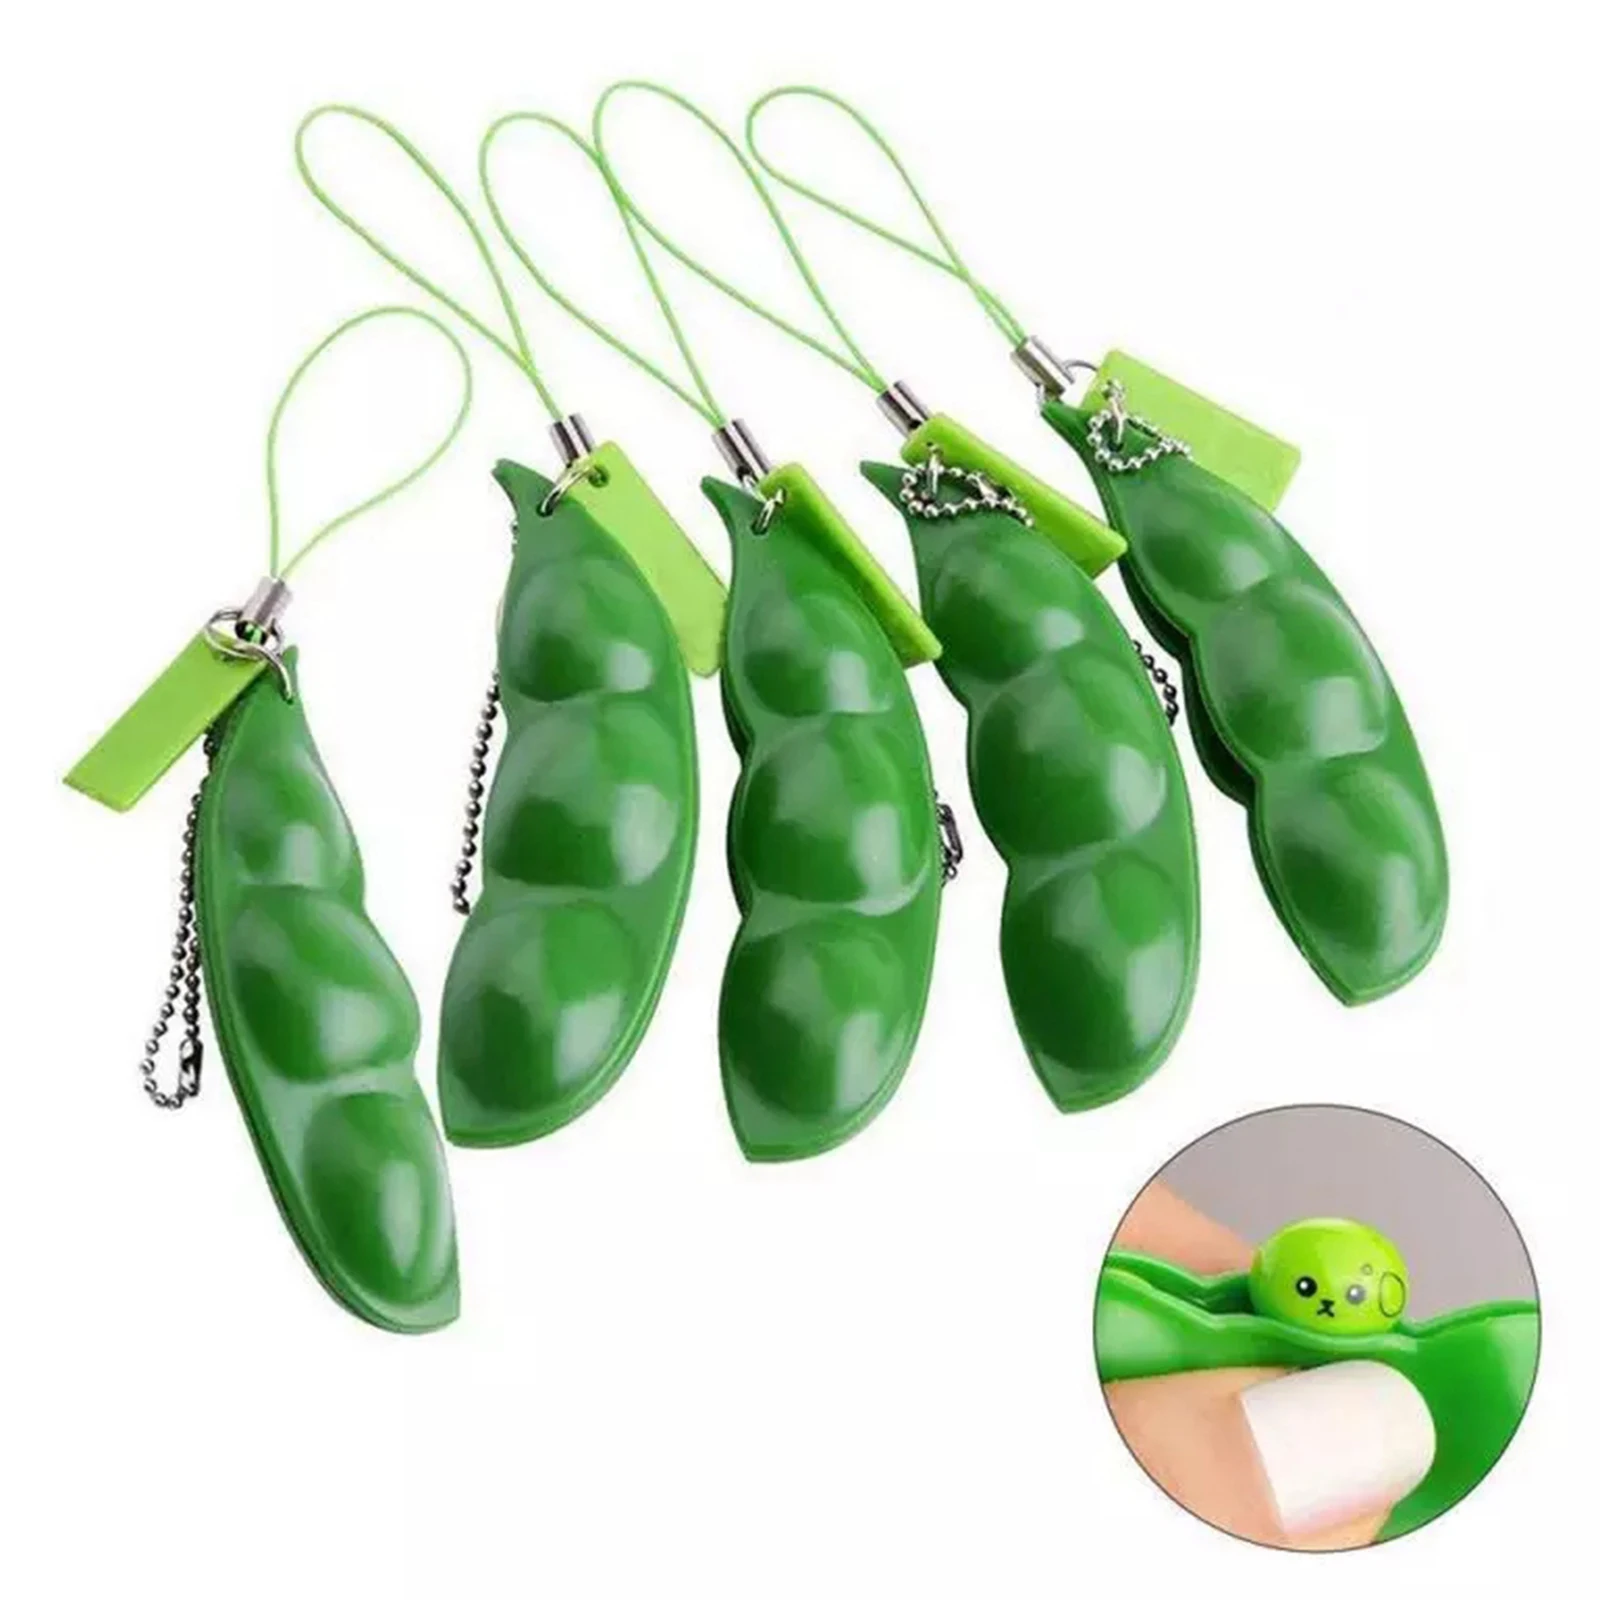 Details about   5pcs Stress Toy Squish Squeeze Bean Pea Soybean Relief Fun Reliever 